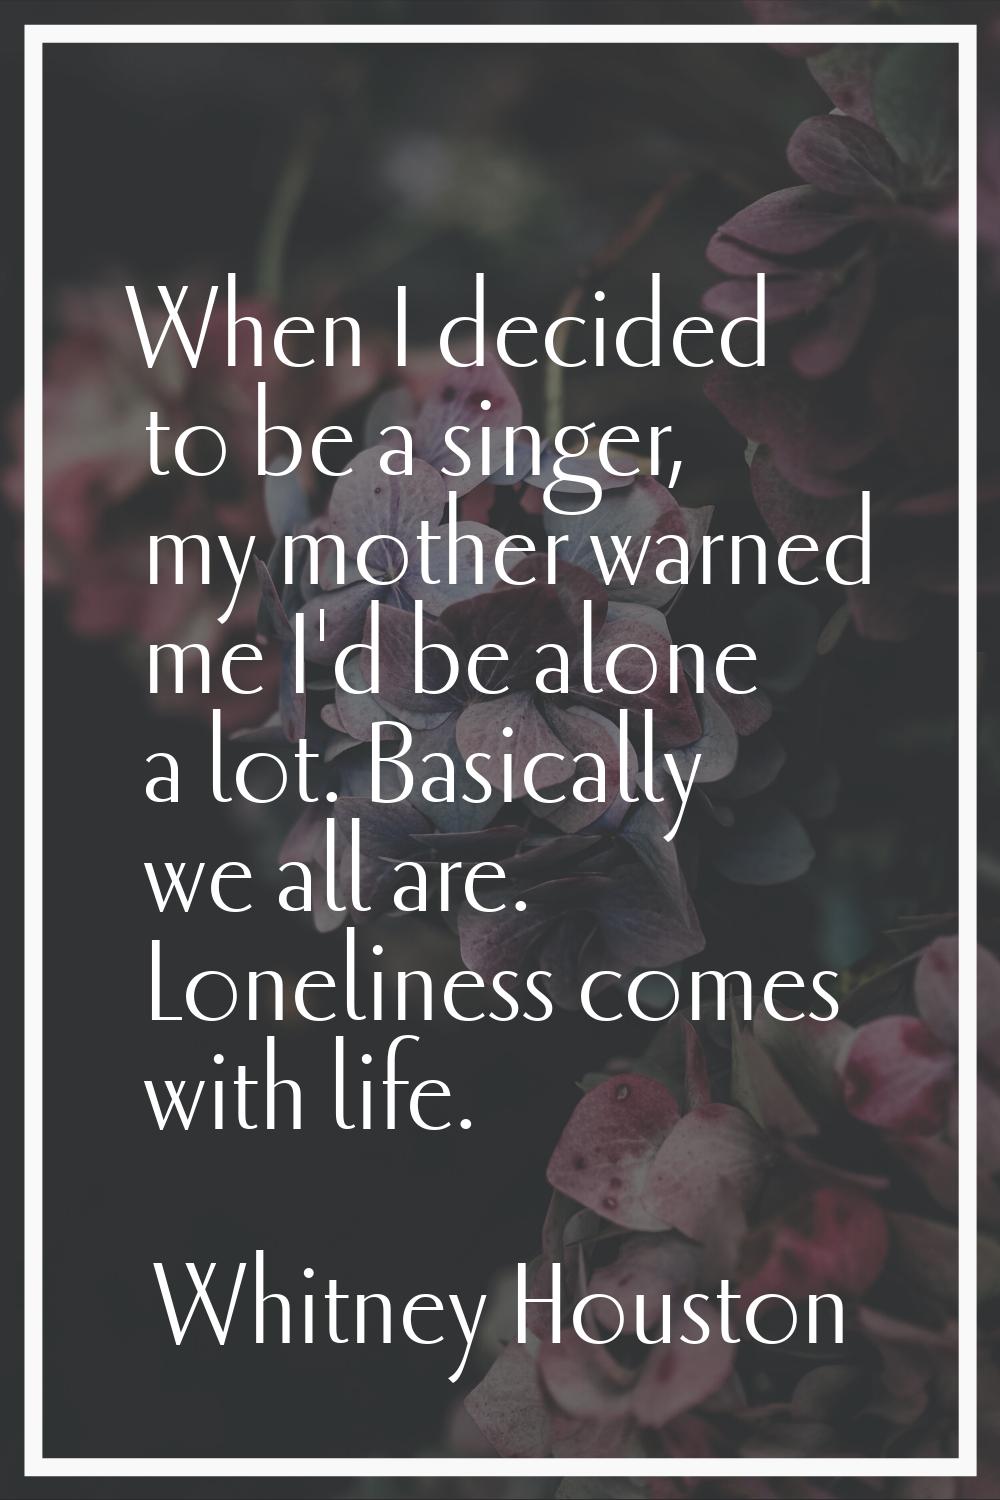 When I decided to be a singer, my mother warned me I'd be alone a lot. Basically we all are. Loneli